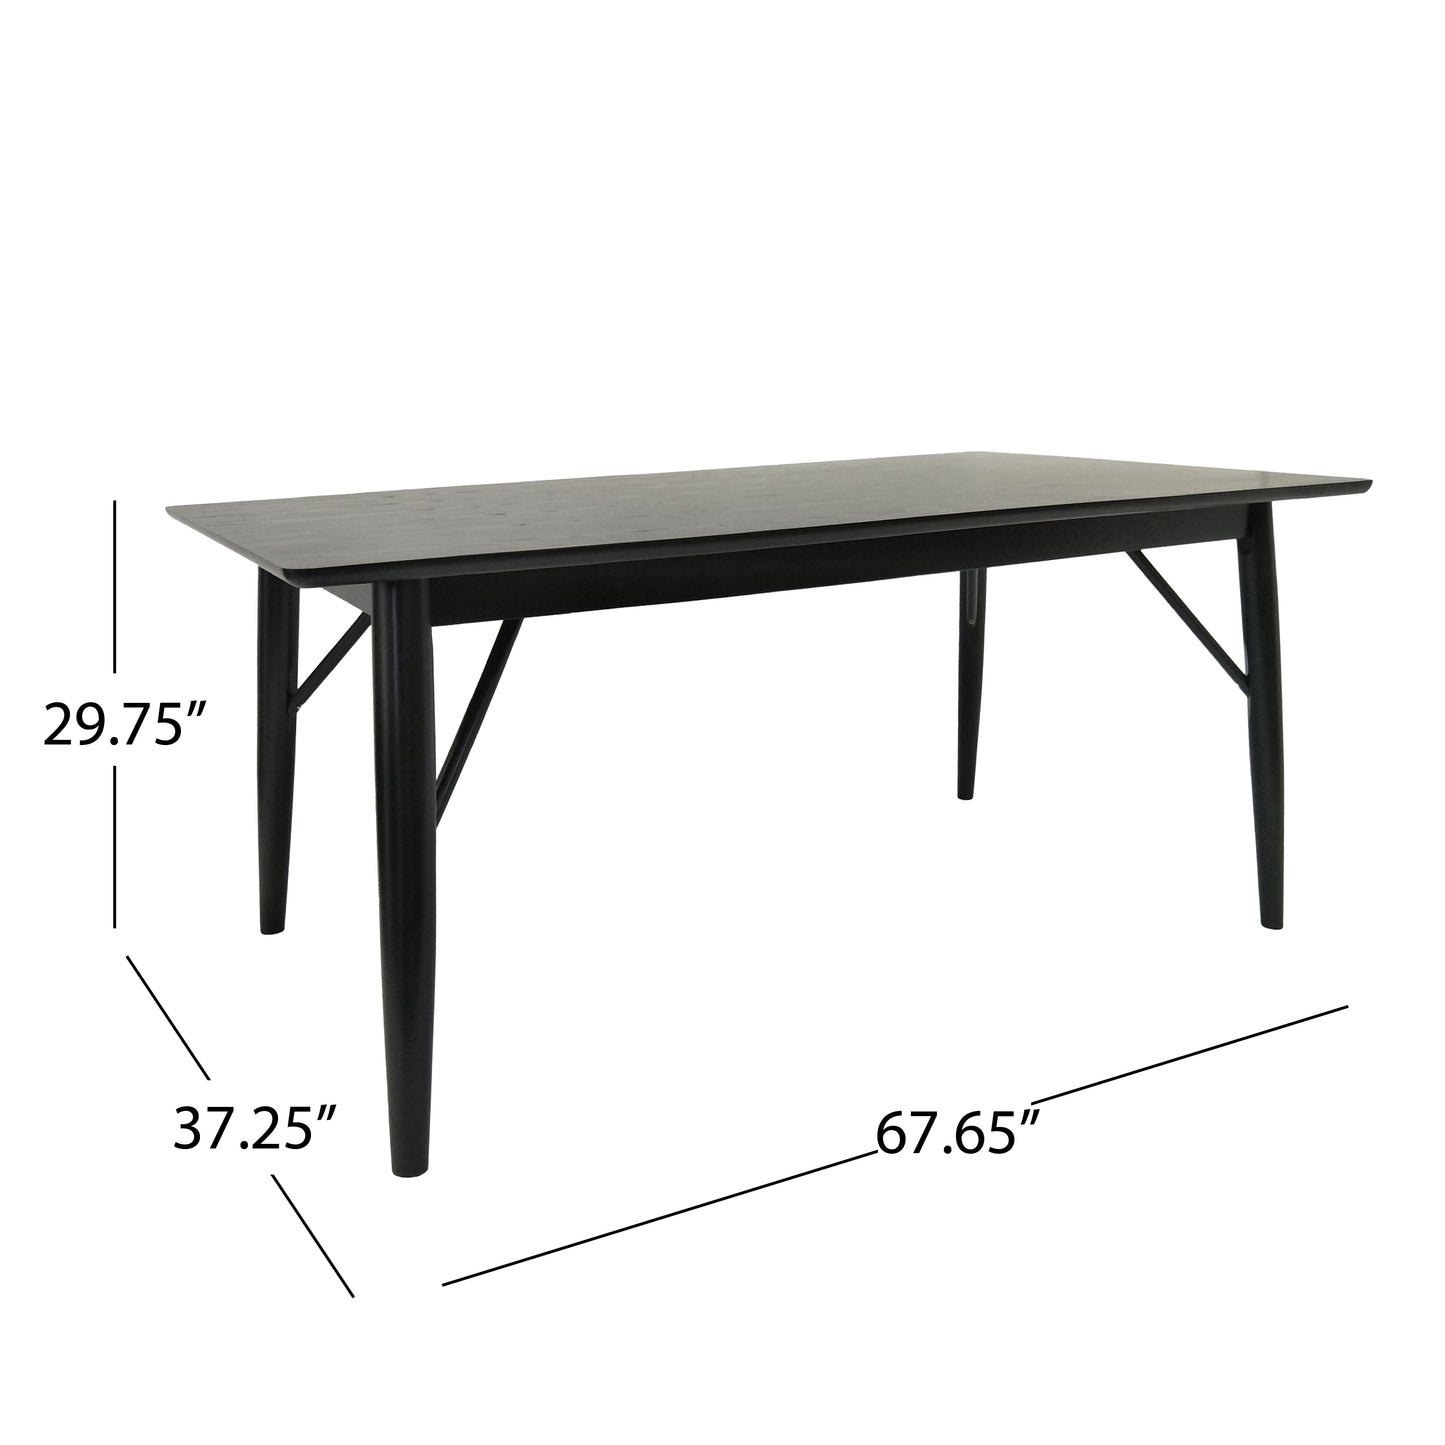 Freesia Contemporary Wooden Rectangular Dining Table, Black